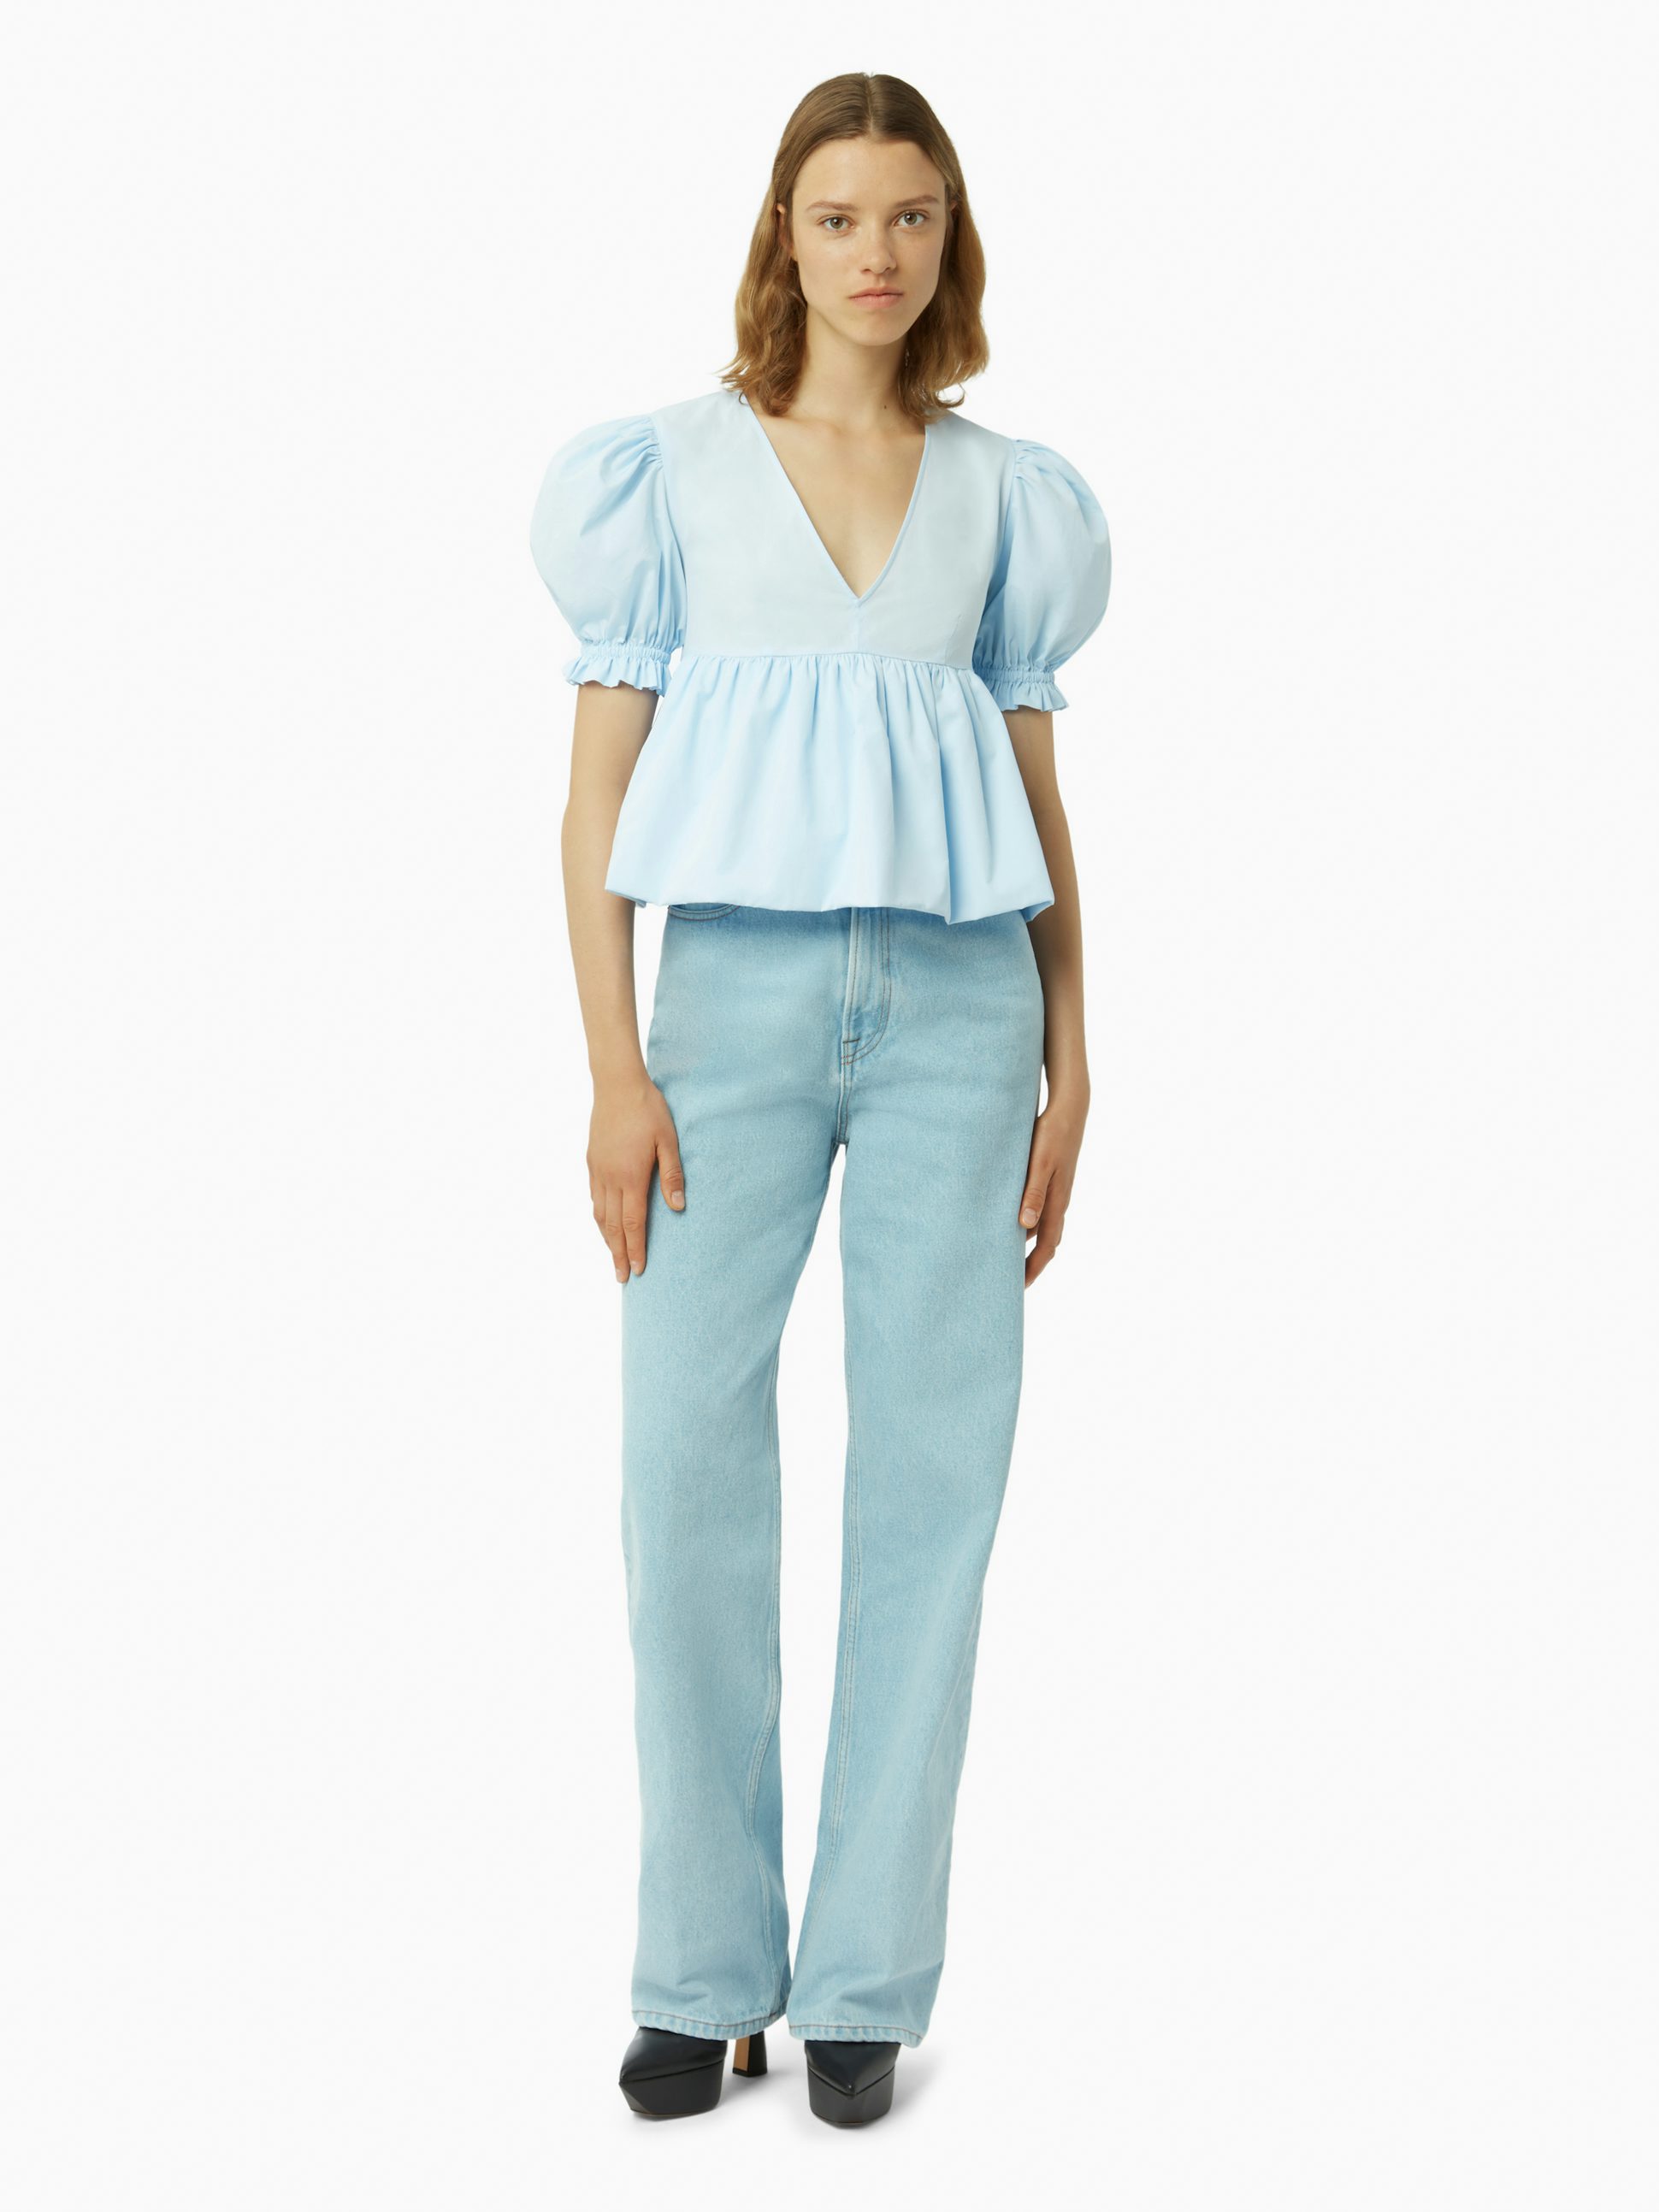 Babydoll top with ruched sleeves in light blue - Nina Ricci